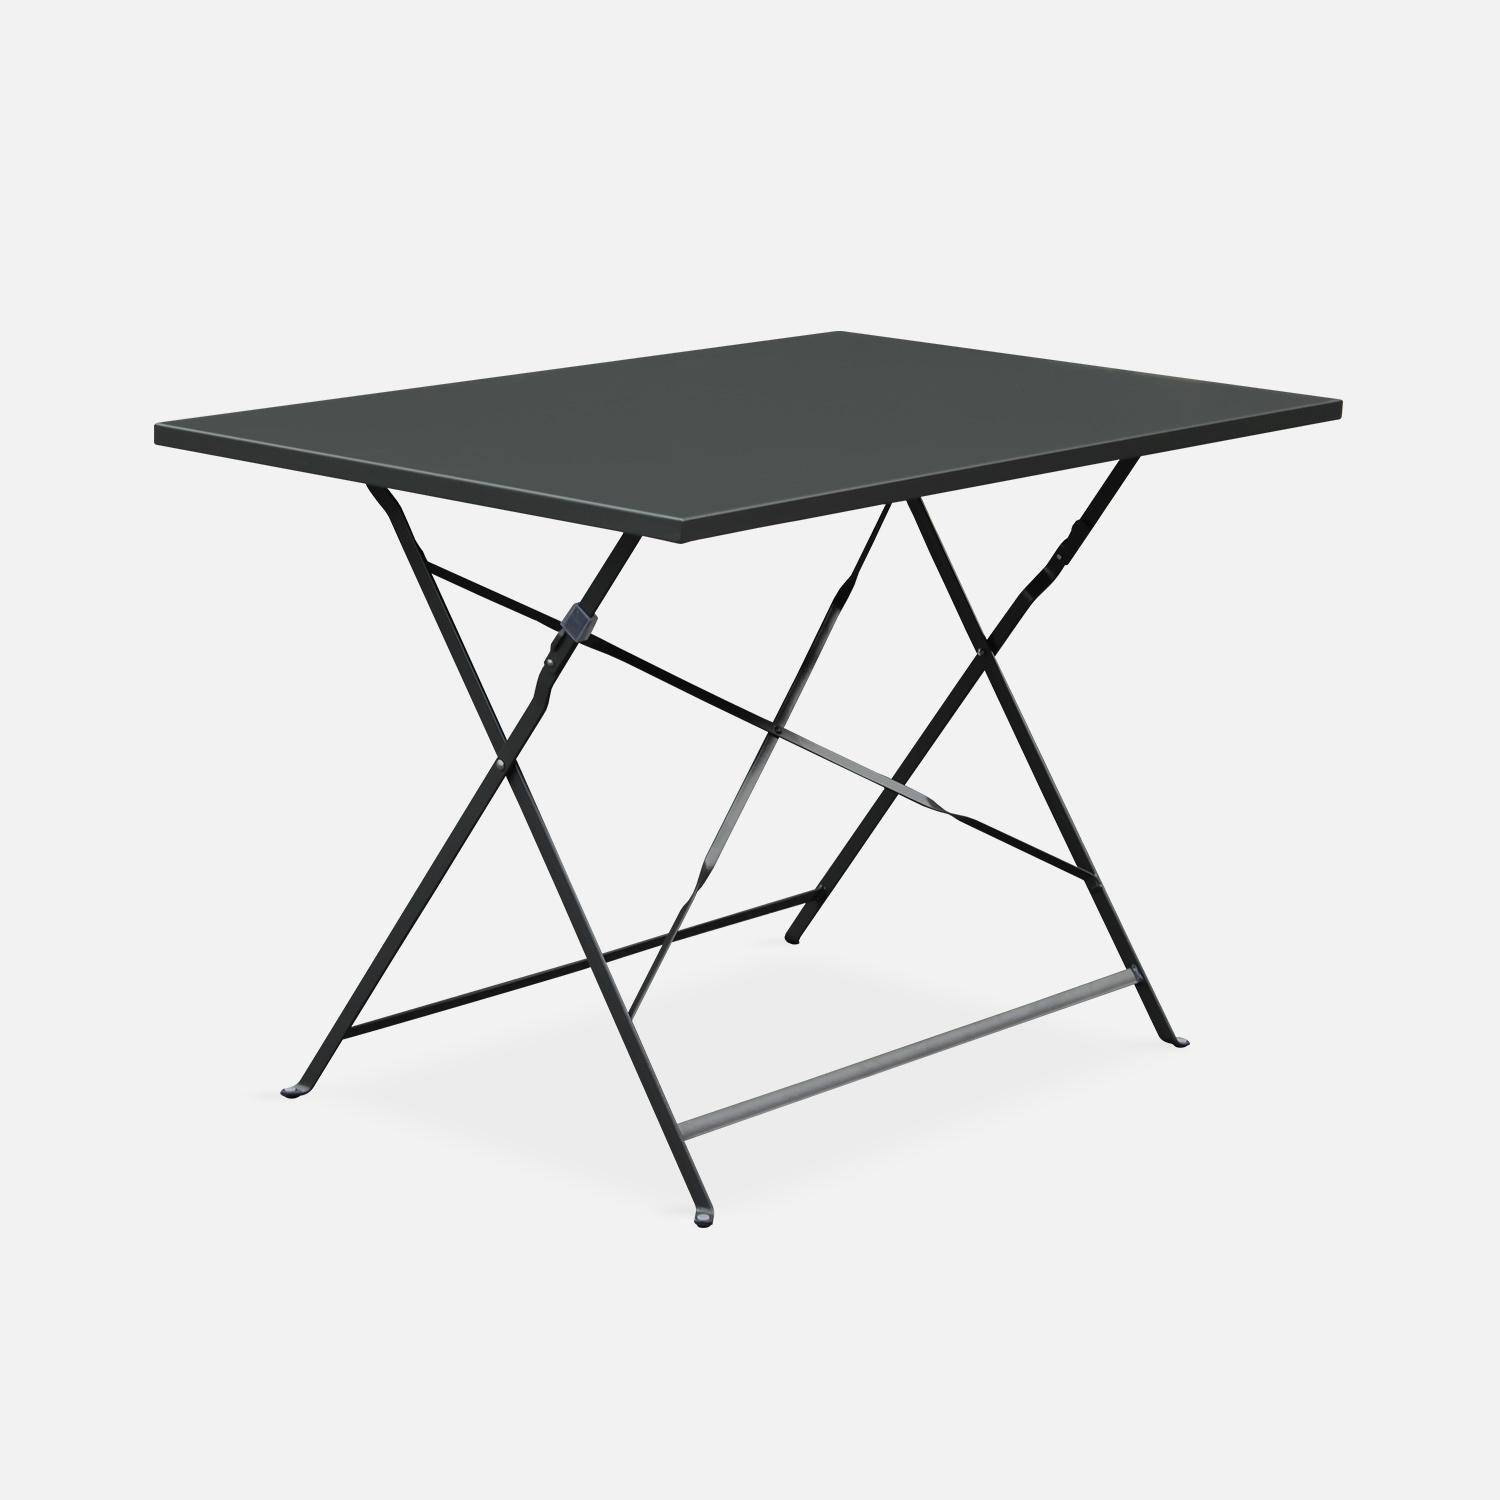 4-seater foldable thermo-lacquered steel bistro garden table with chairs, 110x70cm - Emilia - Anthracite,sweeek,Photo4